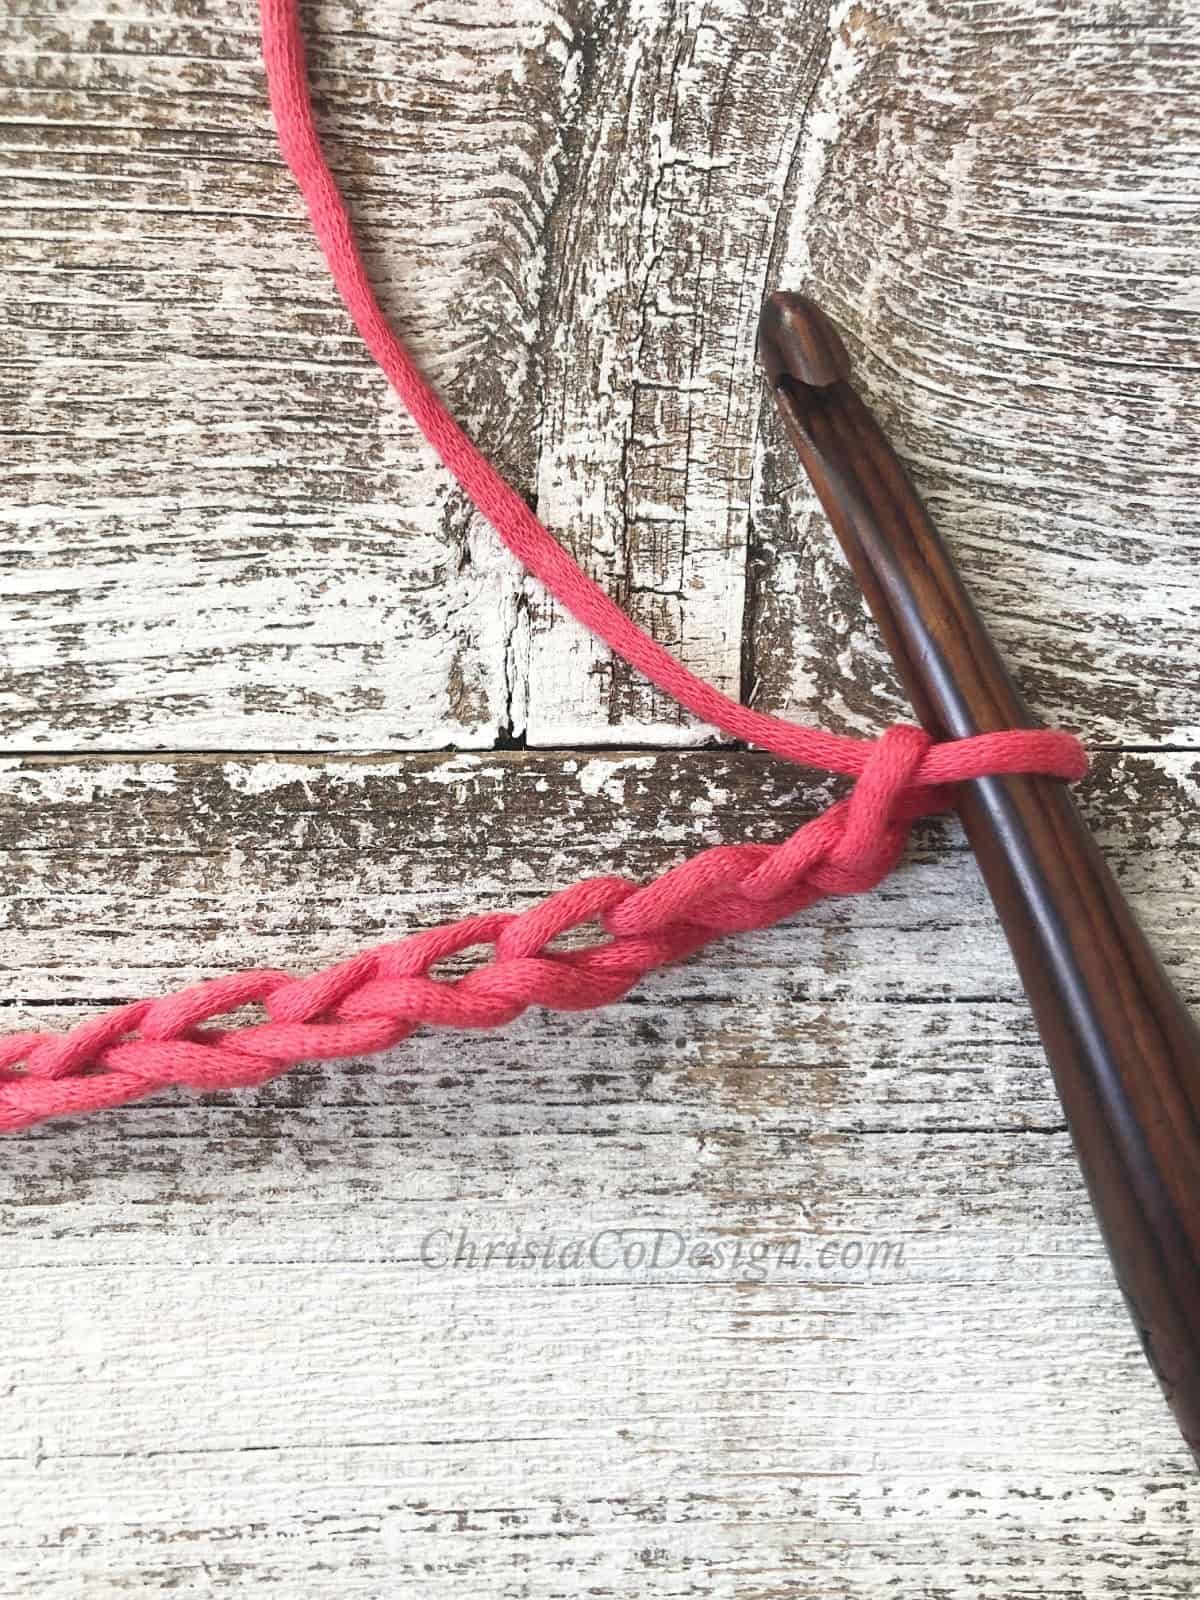 Red chain on wood hook.